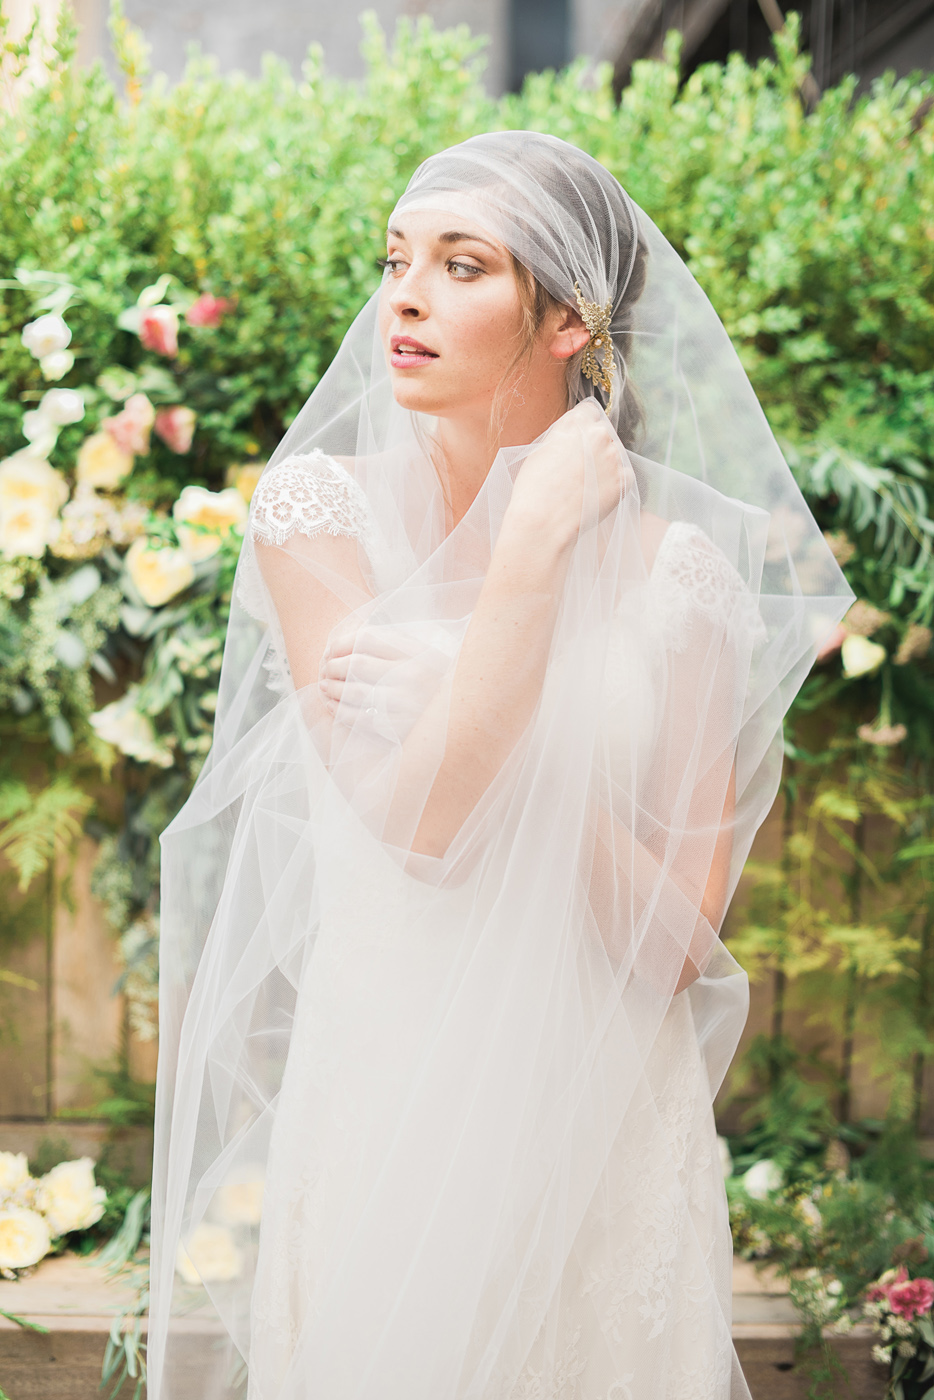 juliet cap tulle veil with gold vine flower crystal detail lace gown hushed commotionjuliet cap tulle veil with gold vine flower crystal detail  hushed commotion